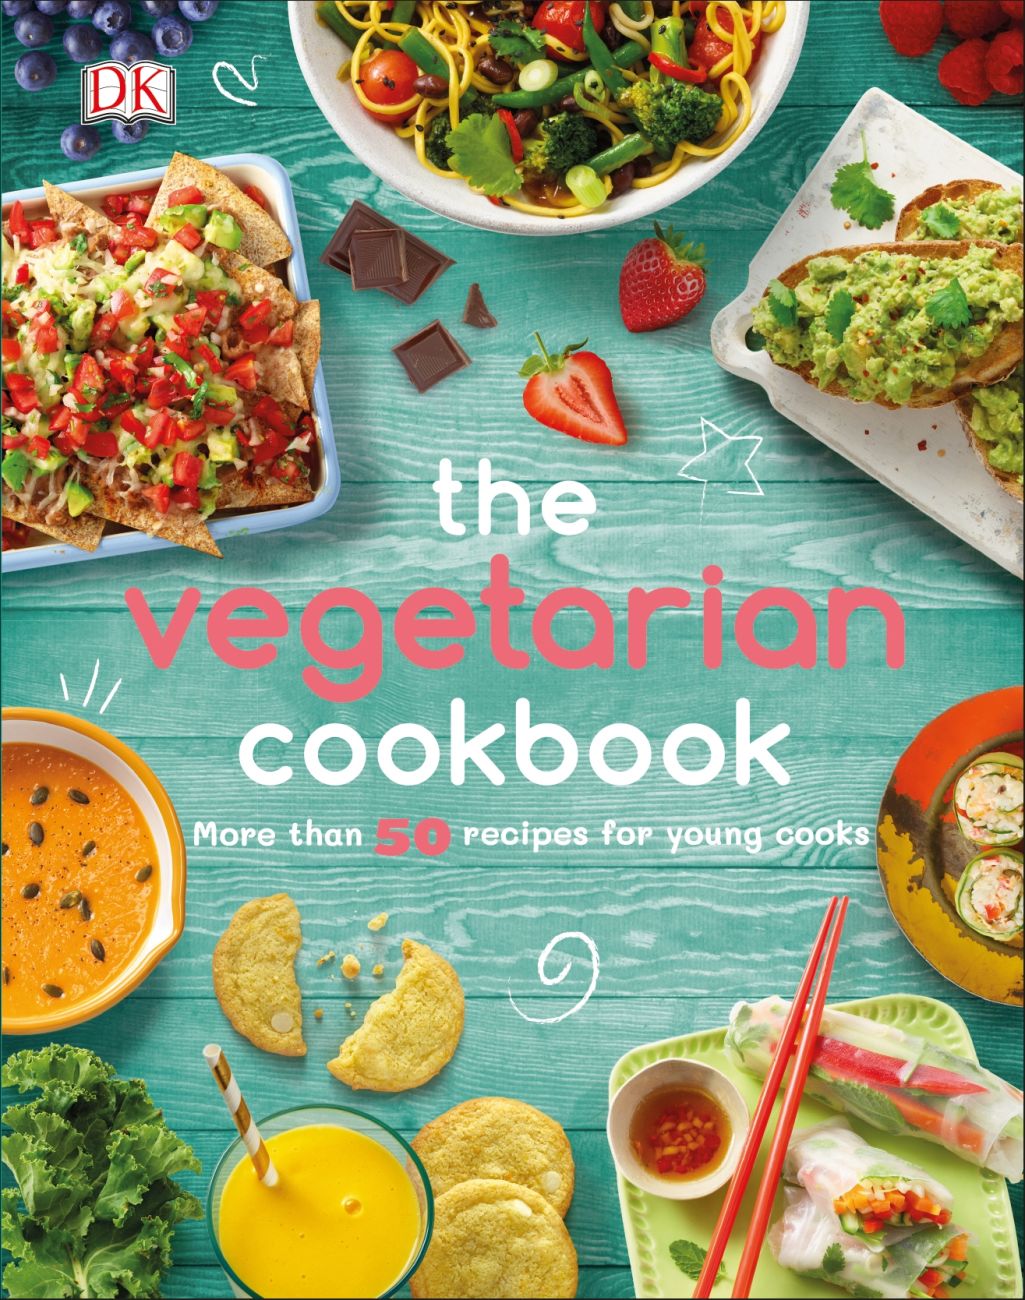 DK The Vegetarian Cookbook – 50m recipes for young chefs